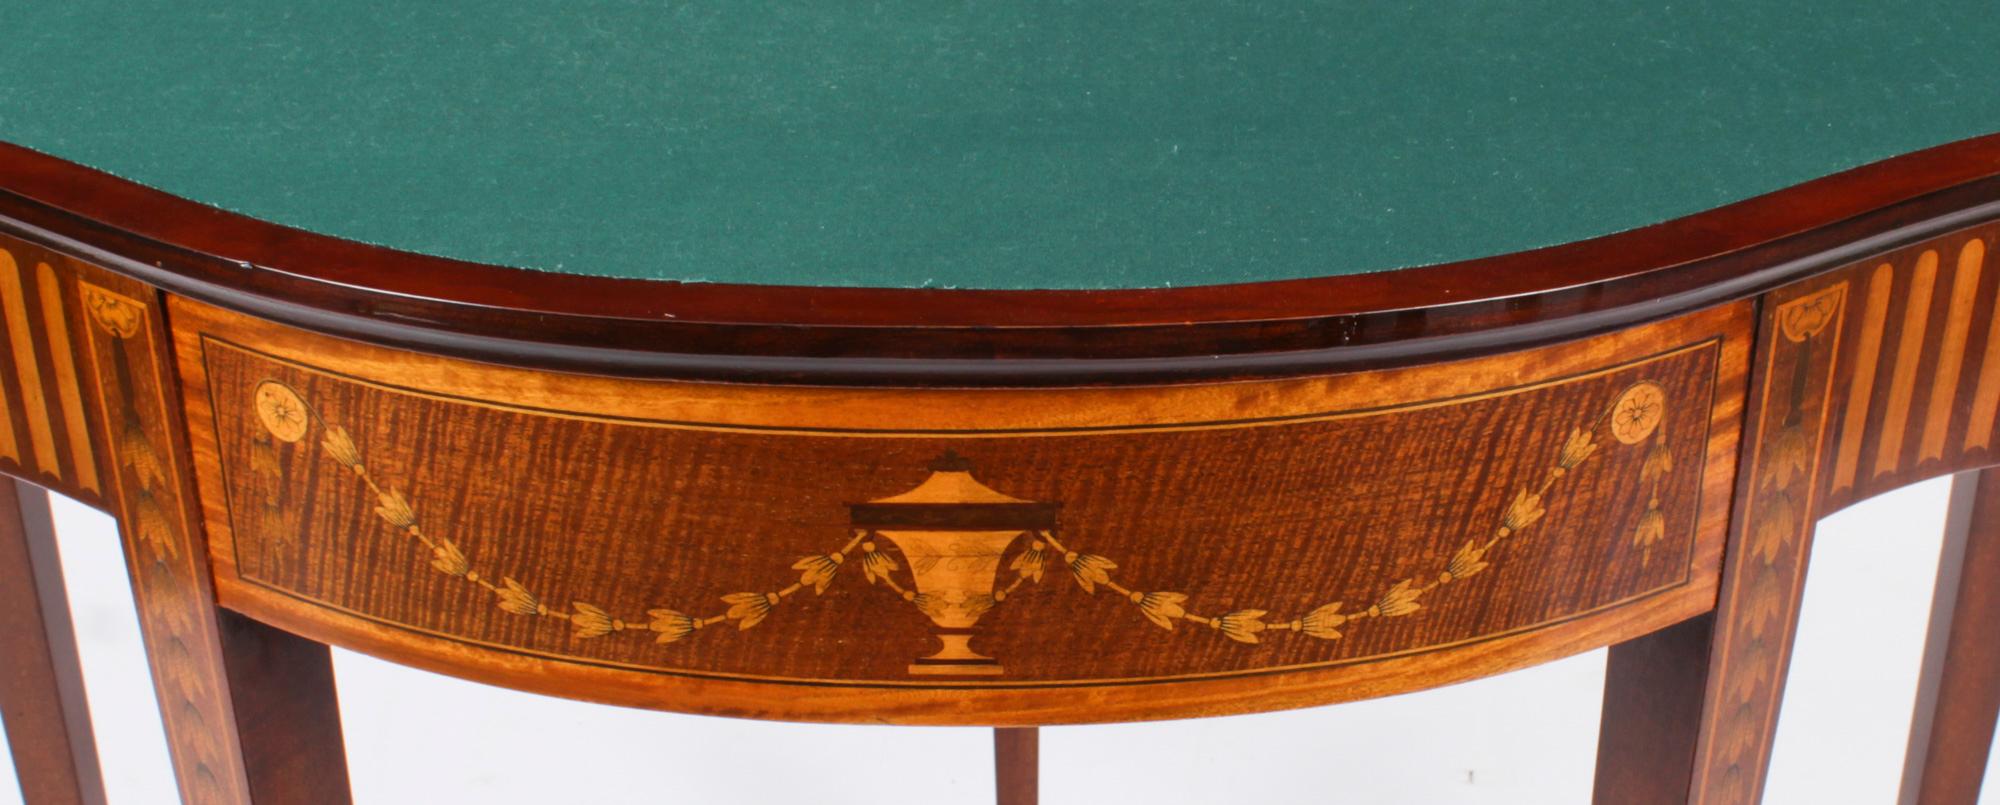 Antique Mahogany and Satinwood Inlaid Serpentine Card Console Table 19th Century For Sale 5